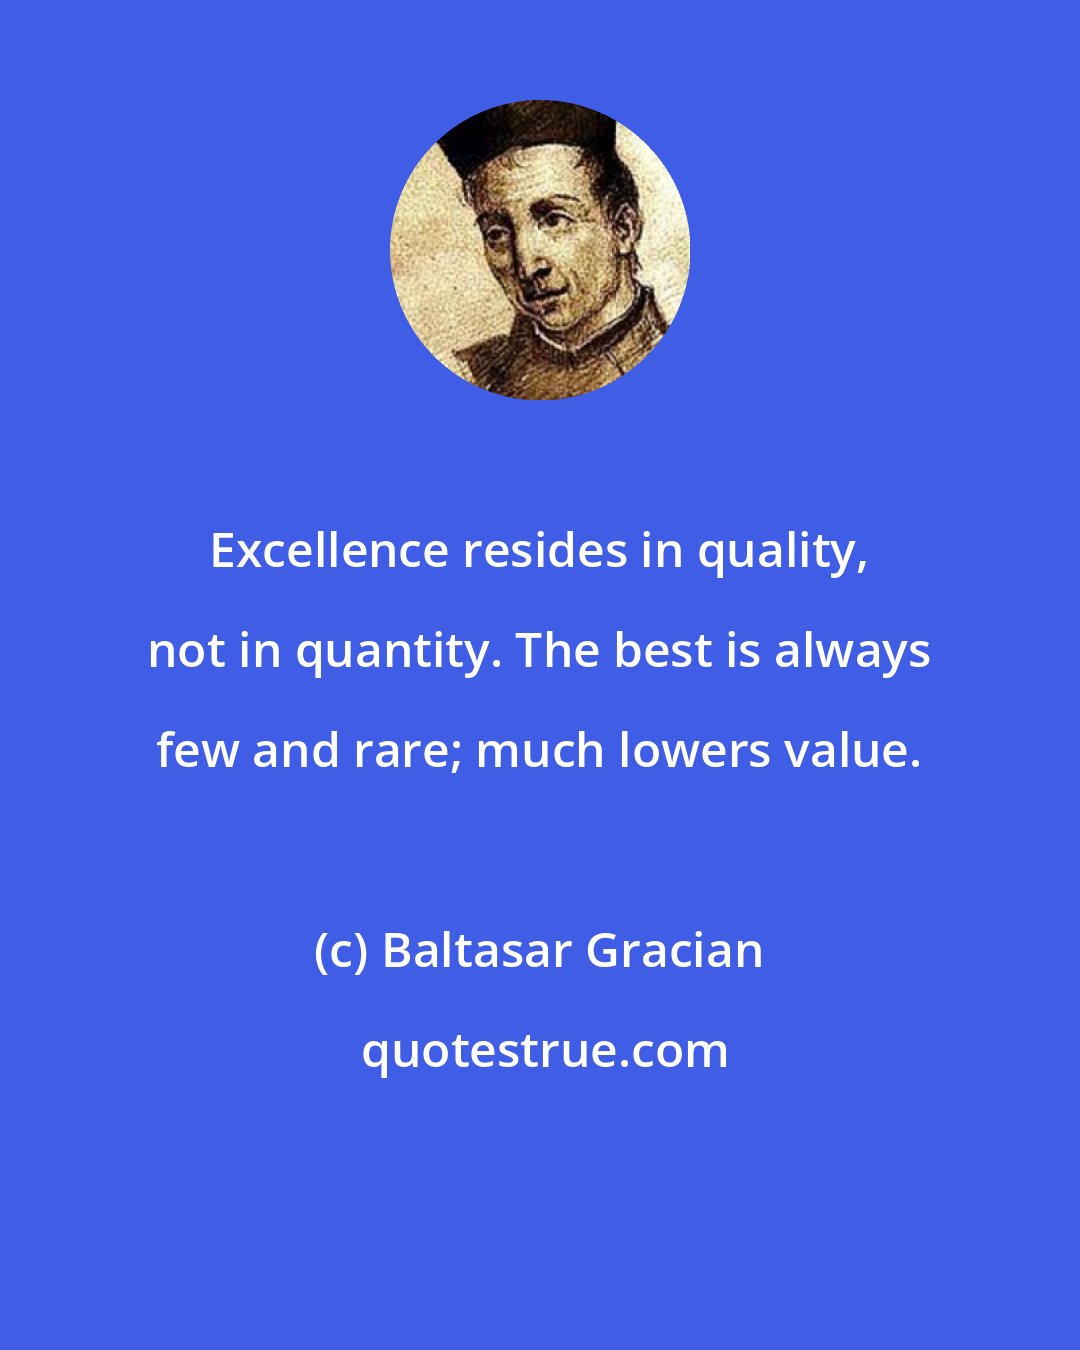 Baltasar Gracian: Excellence resides in quality, not in quantity. The best is always few and rare; much lowers value.